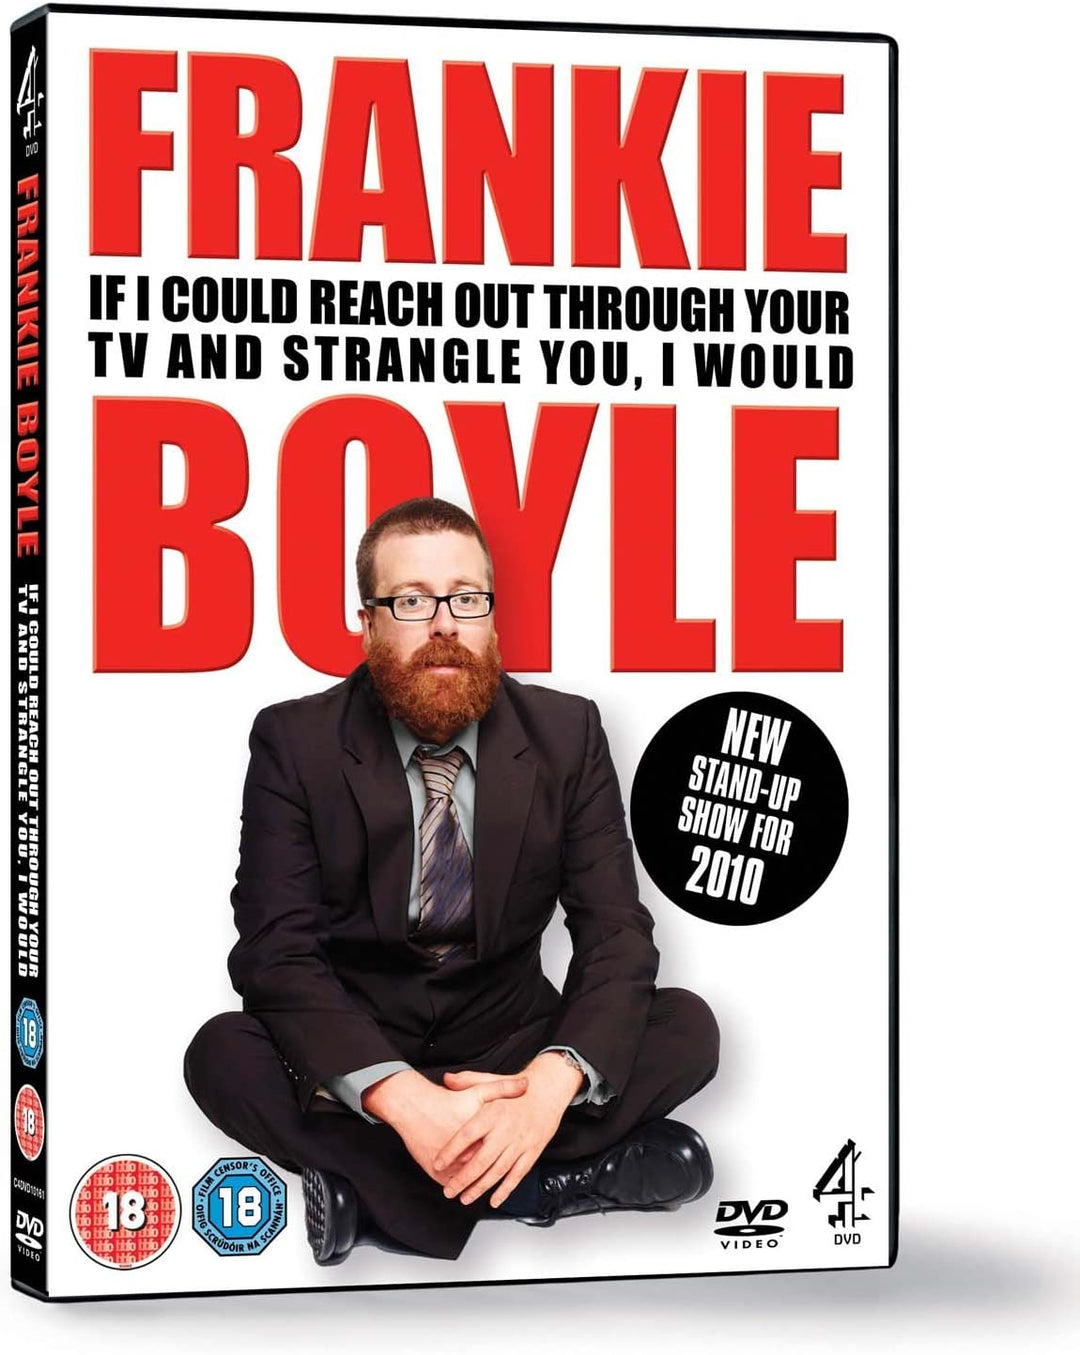 Frankie Boyle Live 2: If I Could Reach Out Through Your TV and Strangle You I Would [DVD]